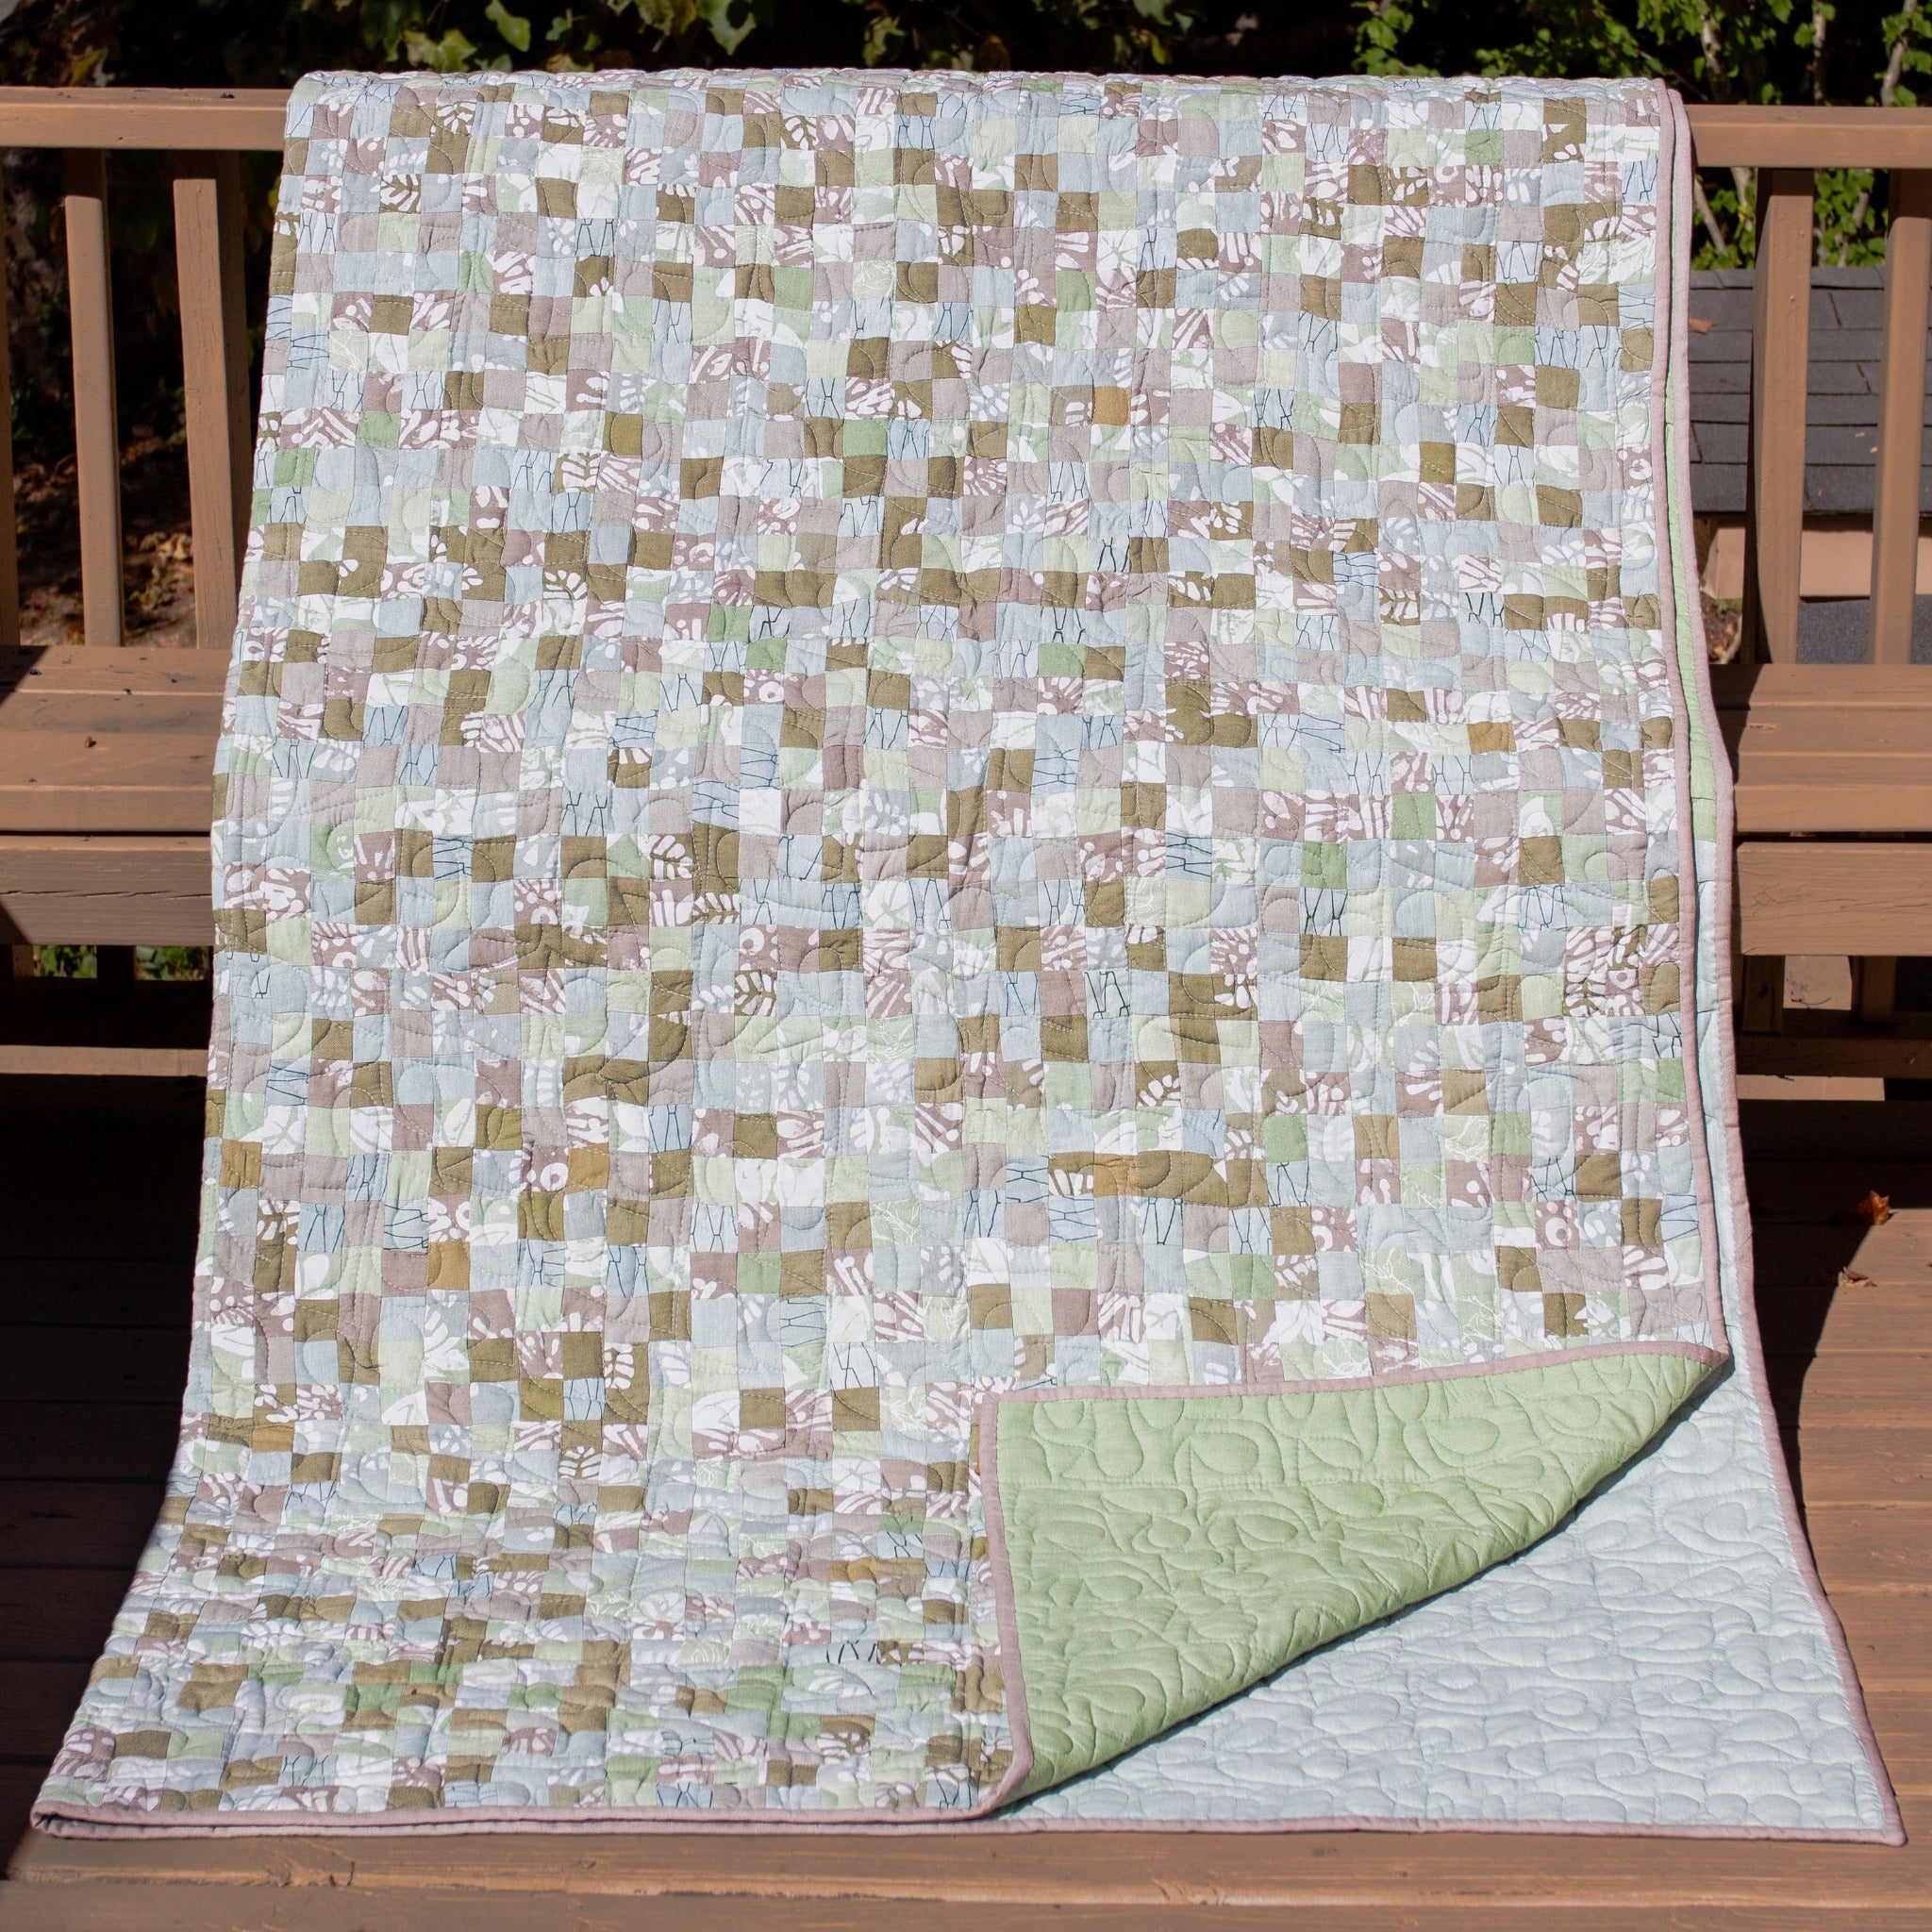 Cool Colors Quilt - handmade by the women of Amani using Kenyan materials for a Fair Trade boutique